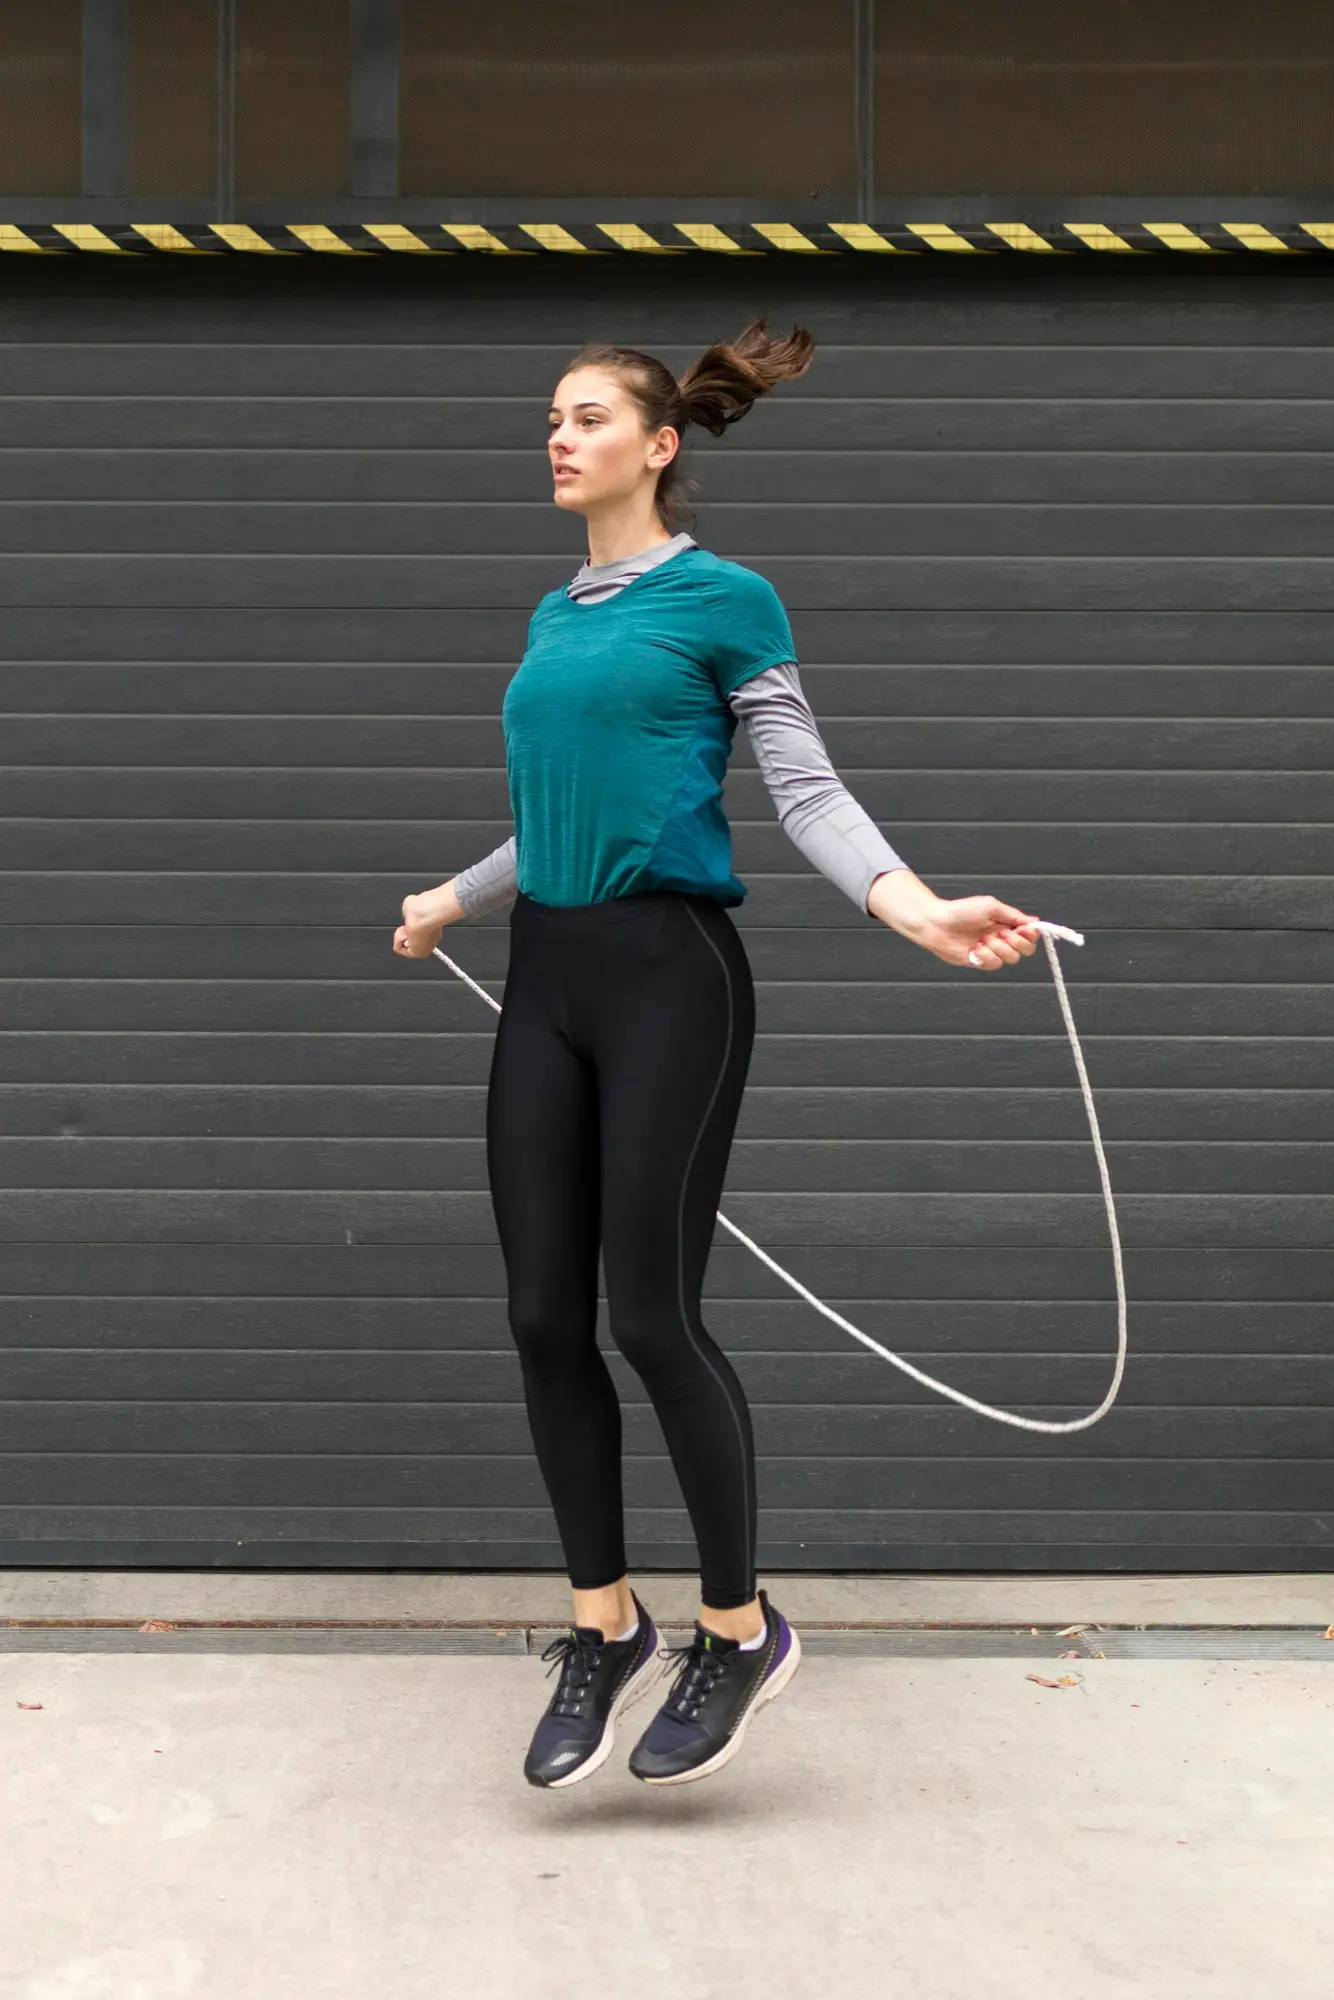 jump-rope Top 12 Cardio Exercises For Losing Weight You Can Do At Home